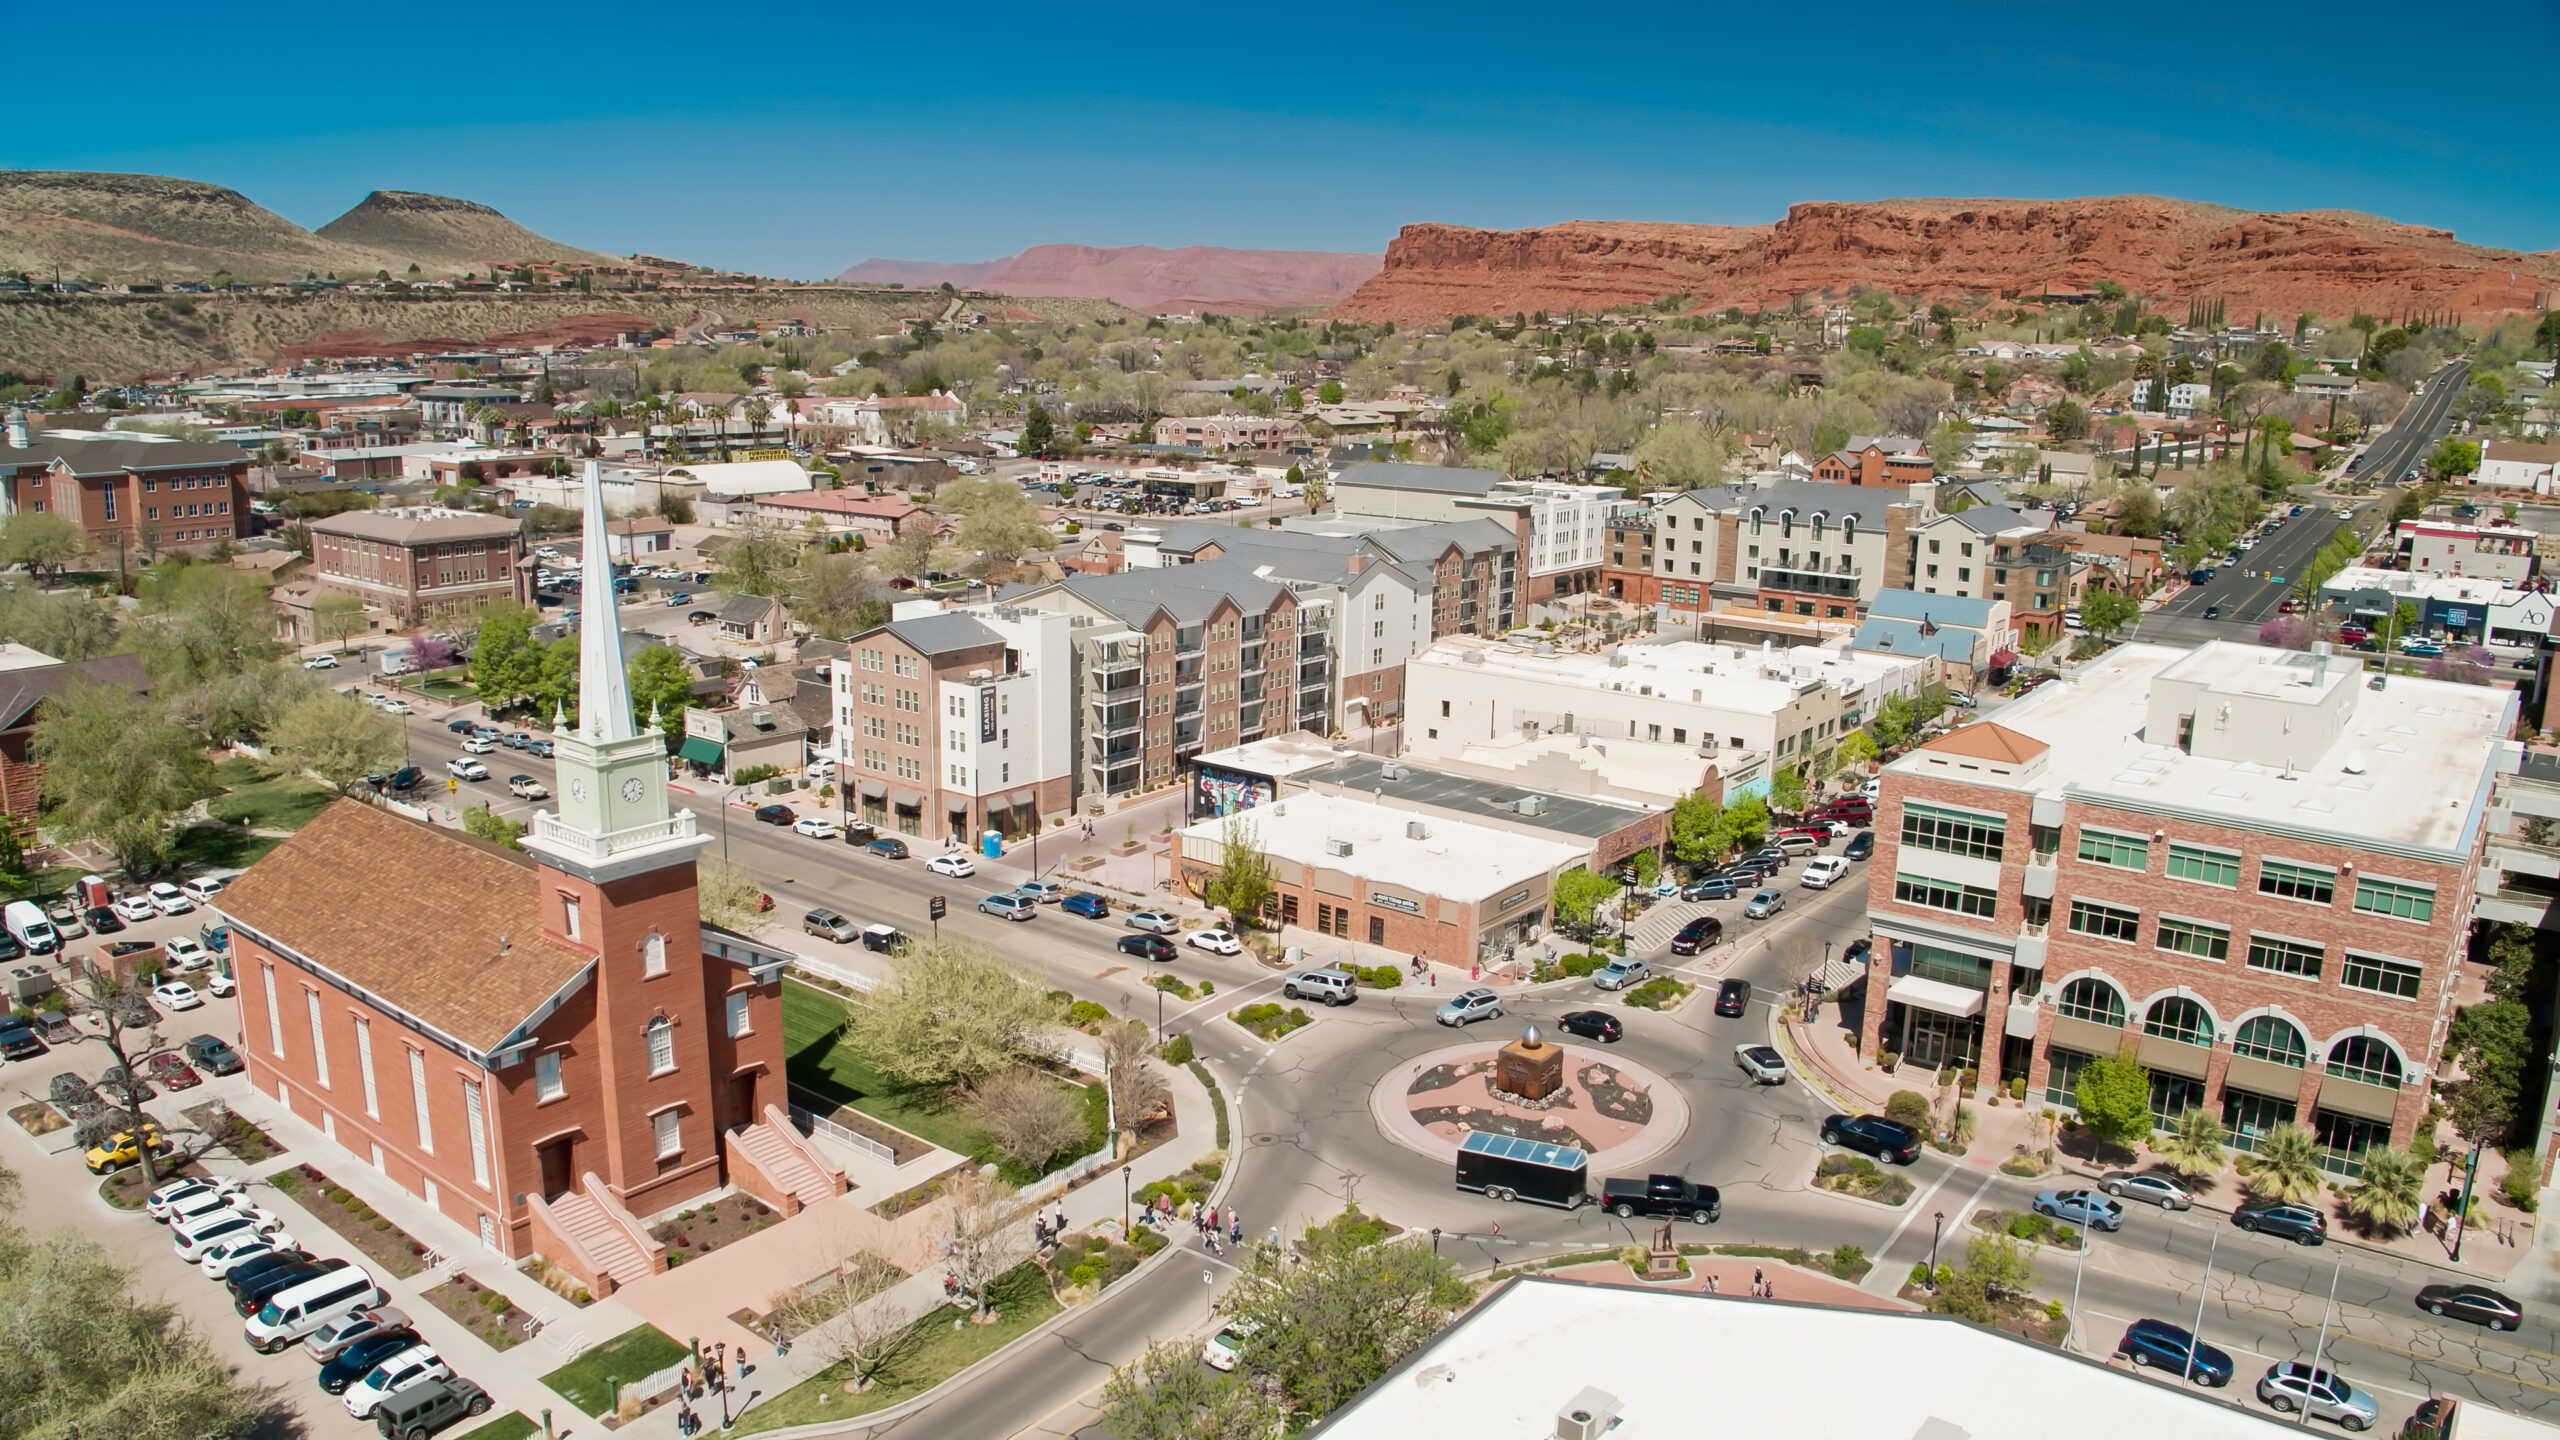 An aerial shot of St. George, Utah. Buildings are red brick with trees in between. A red bluff is in the distance.